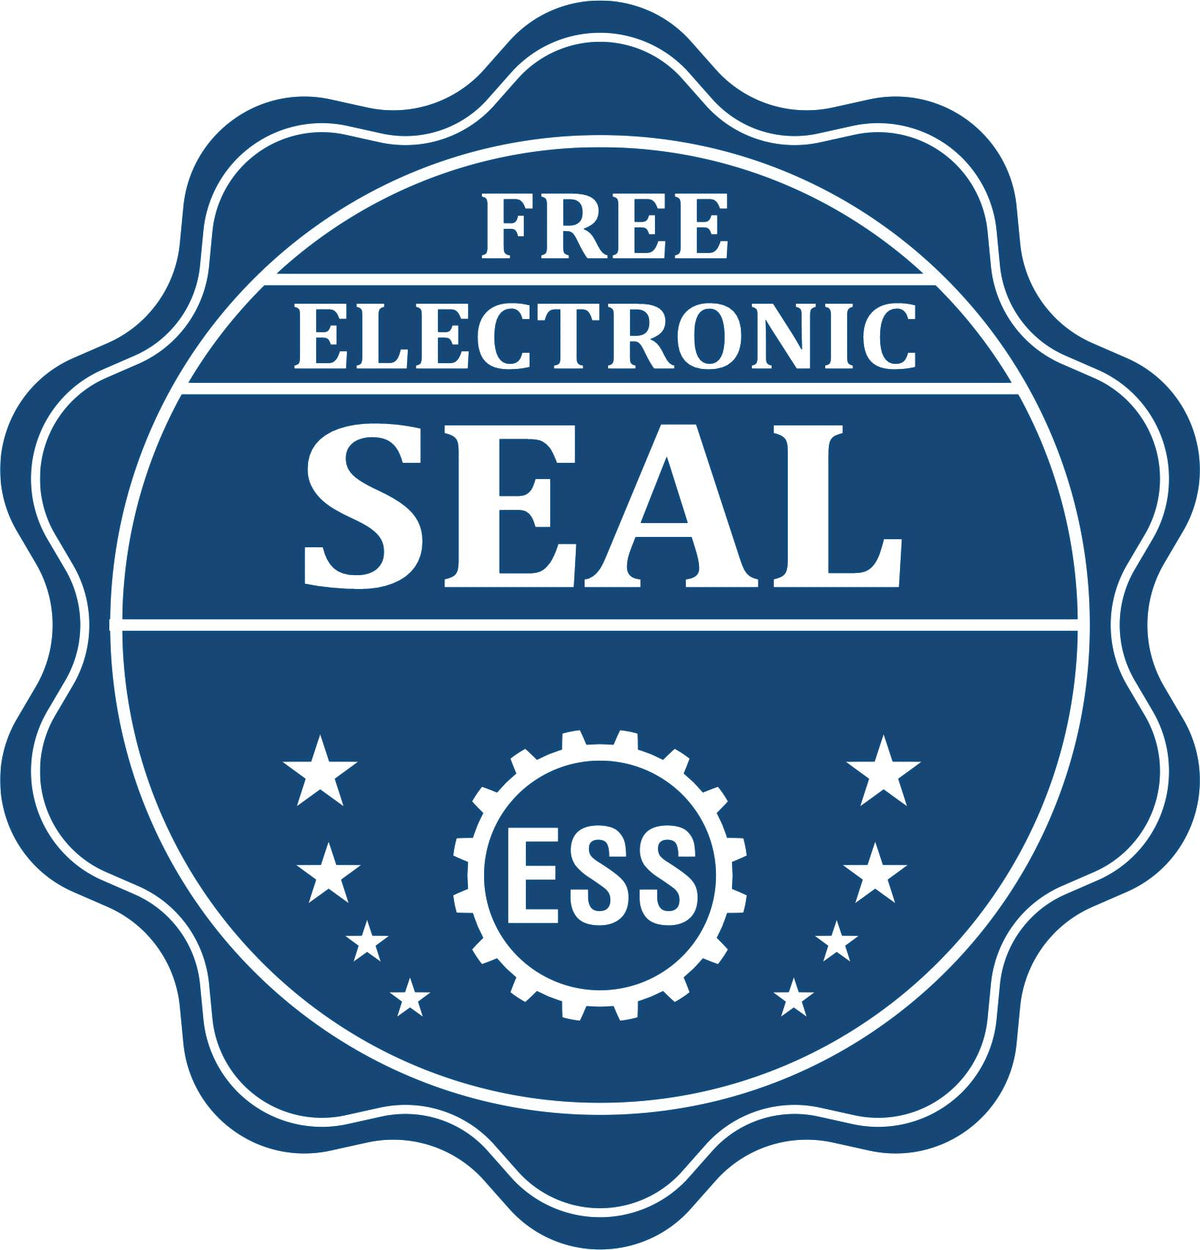 A badge showing a free electronic seal for the State of Vermont Soft Land Surveyor Embossing Seal with stars and the ESS gear on the emblem.